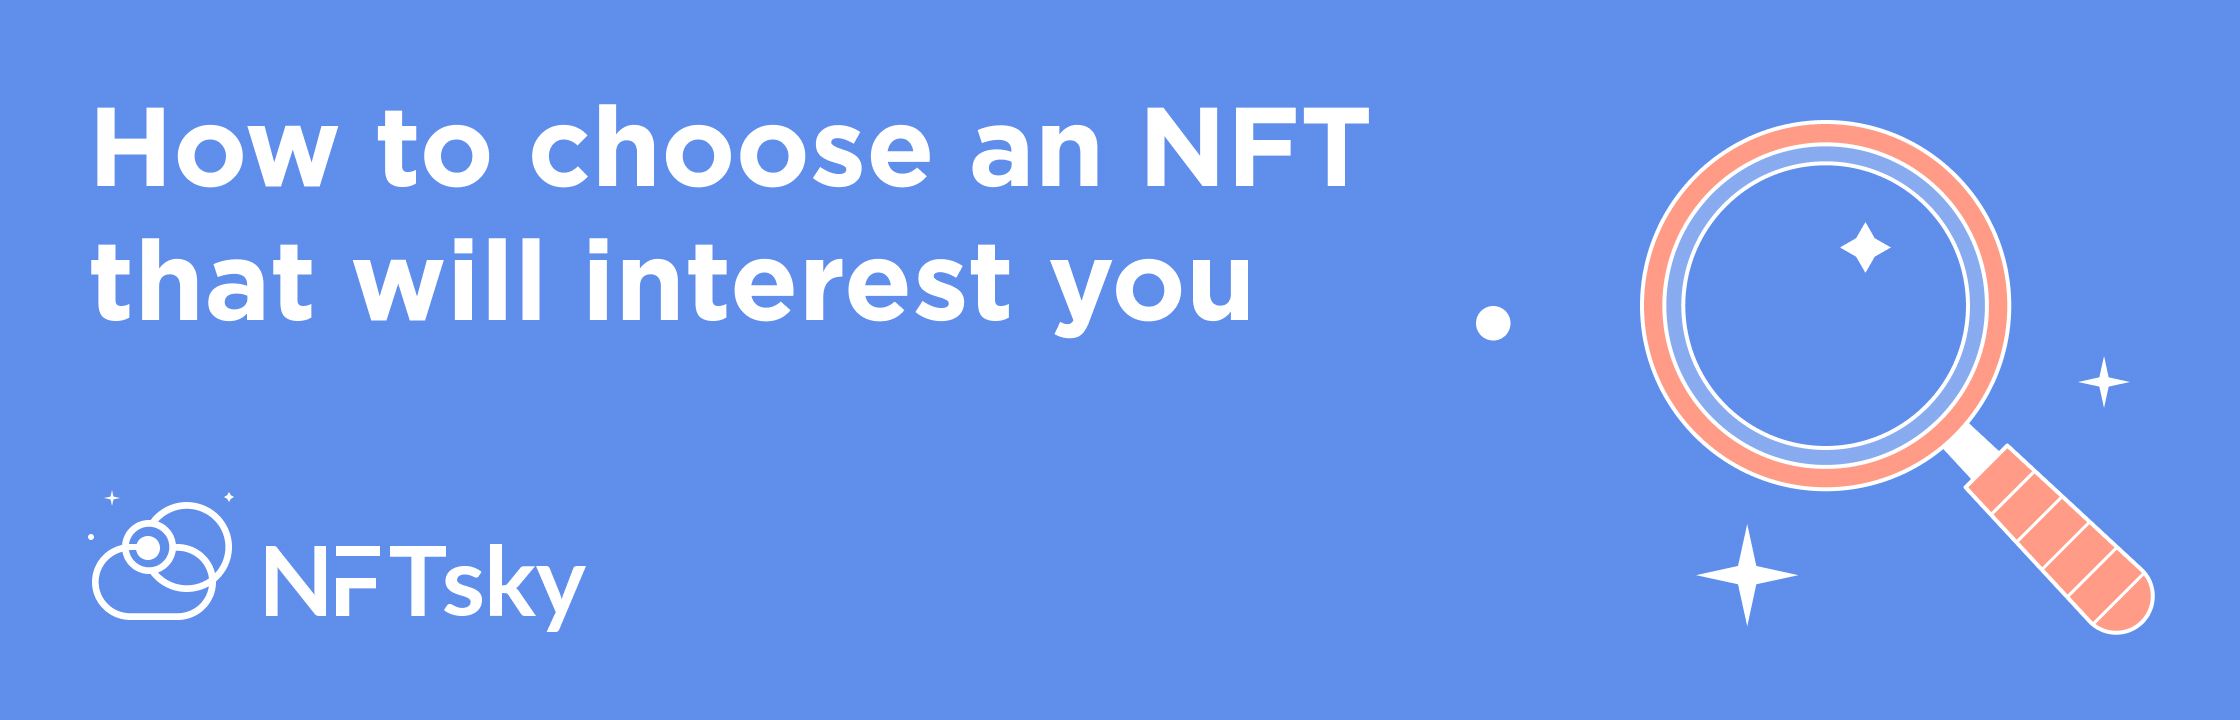 How to choose an NFT that will interest youon NFTsky